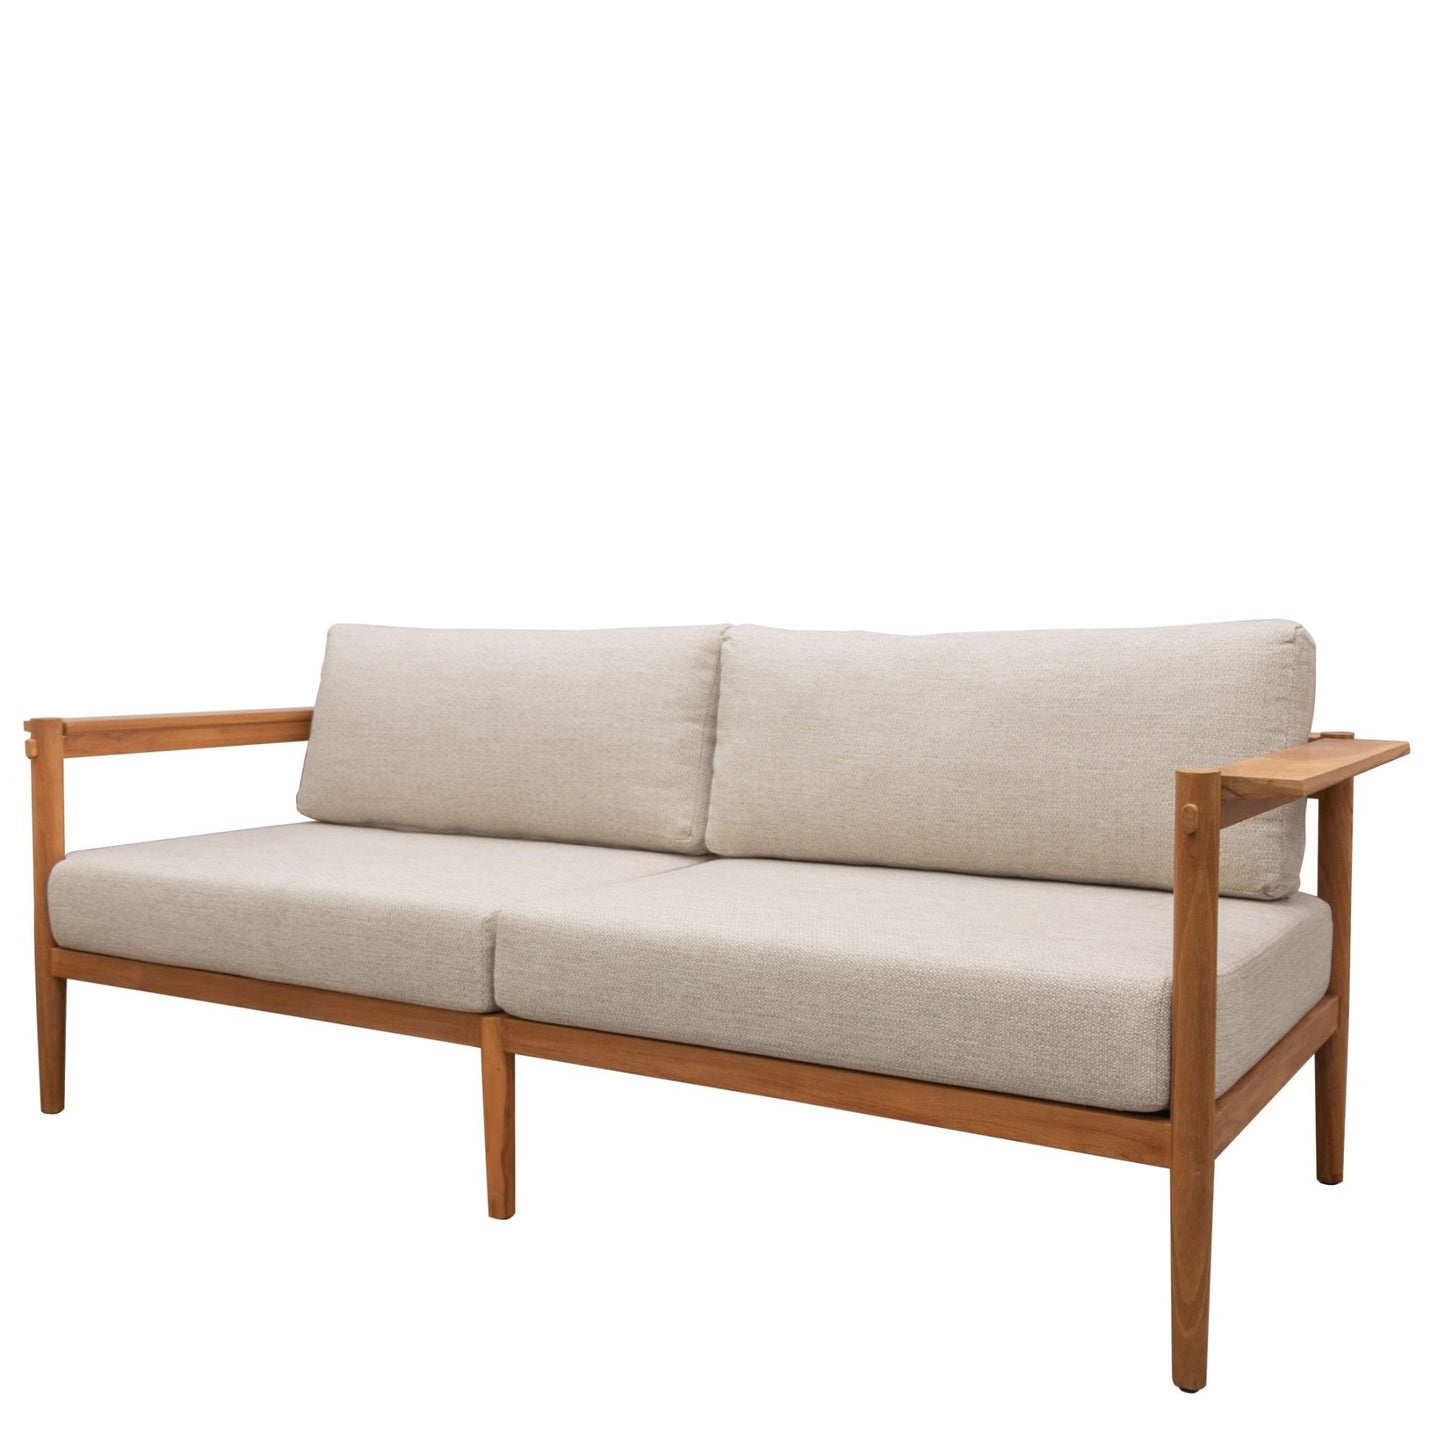 Moby Teak Outdoor 3 Seater Sofa